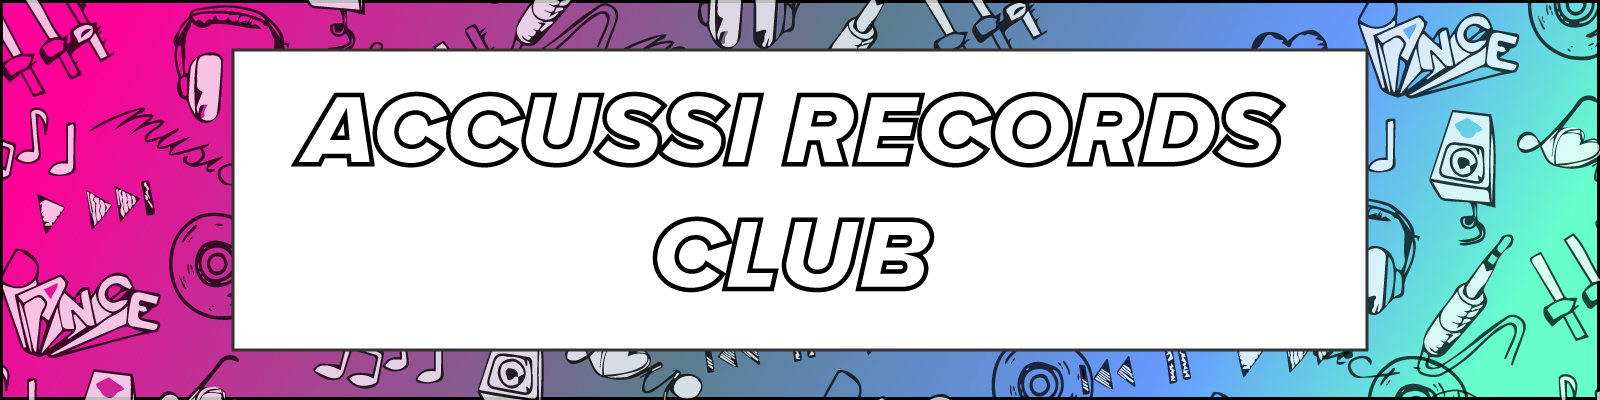 Accussi-Records-Happiness-Club-website